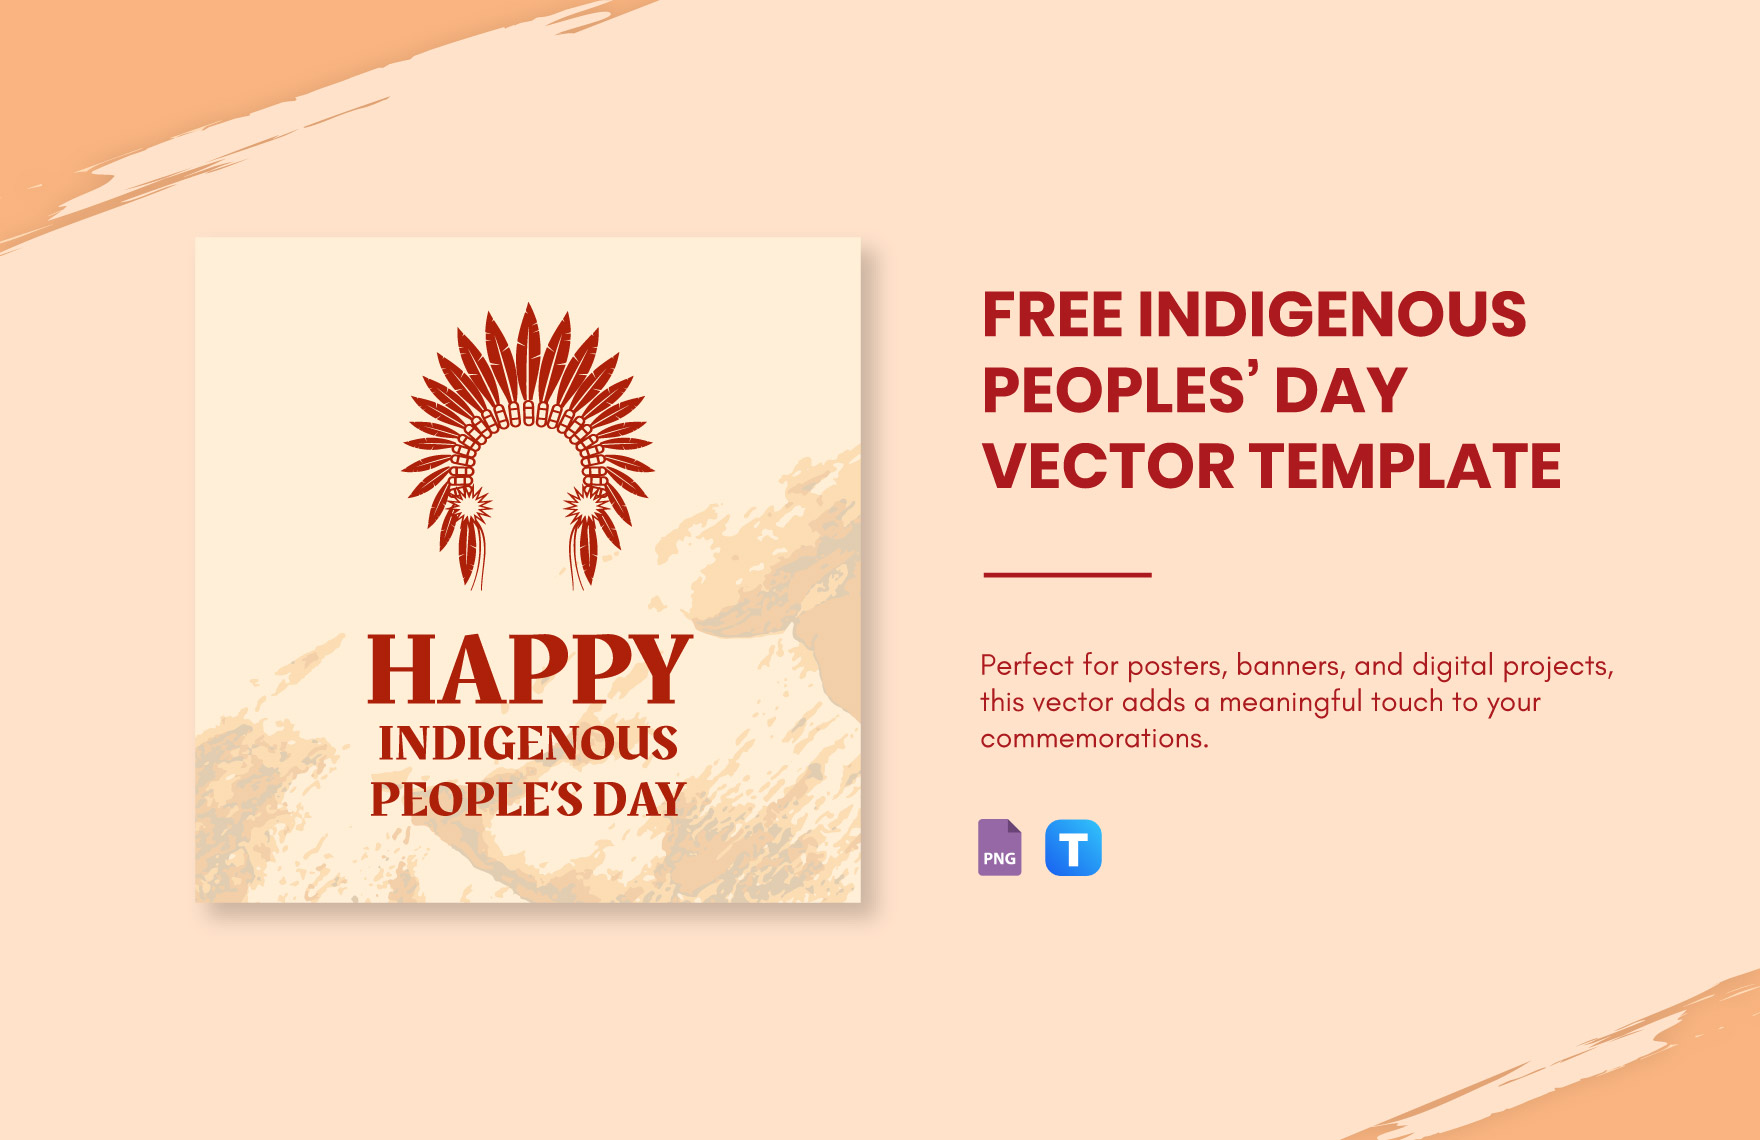 Free Indigenous Peoples' Day Vector